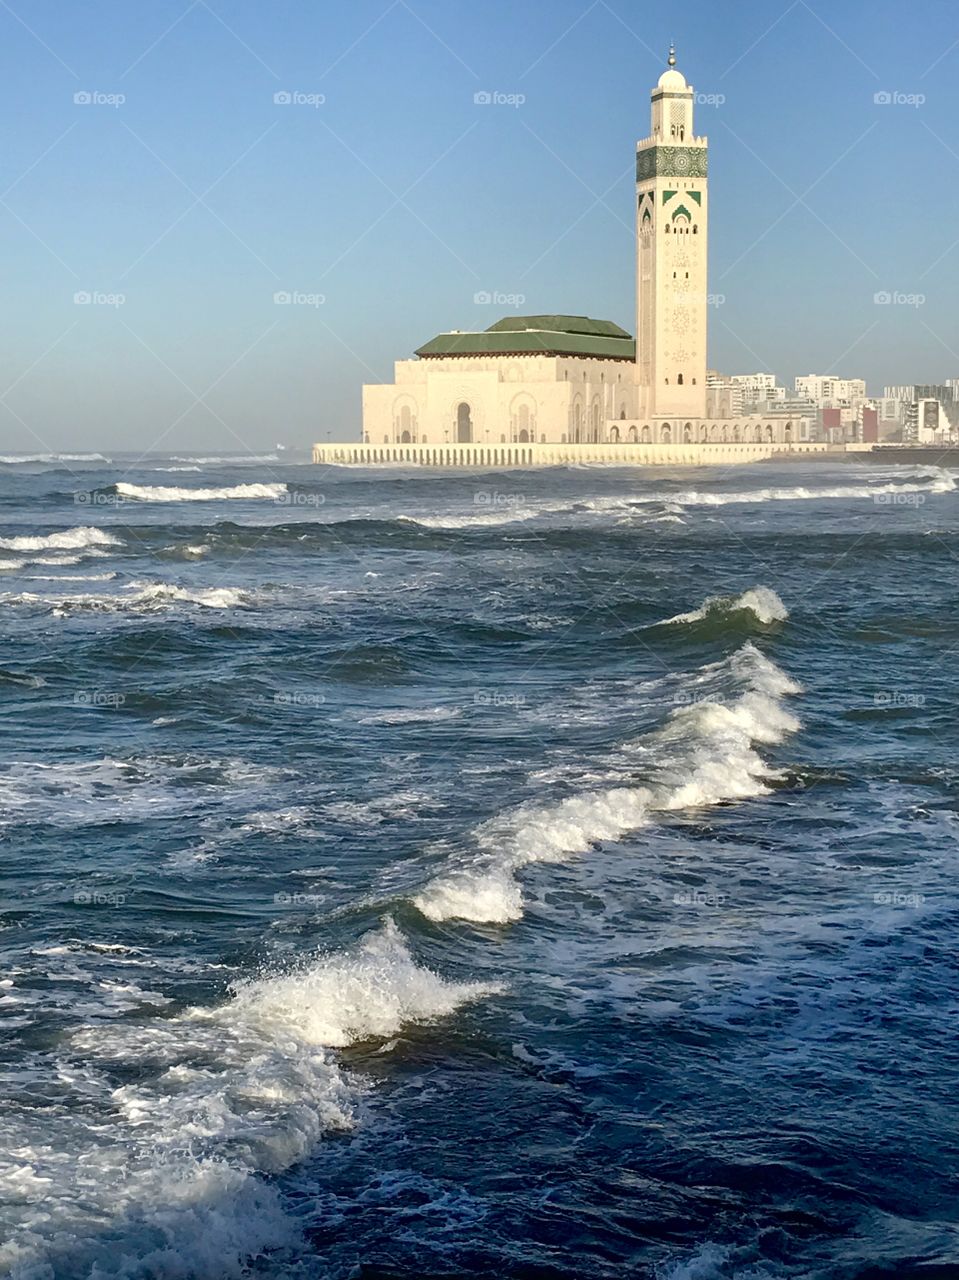 the wonderful Hassan II Mosque in Casablanca is the third biggest mosque in the world 